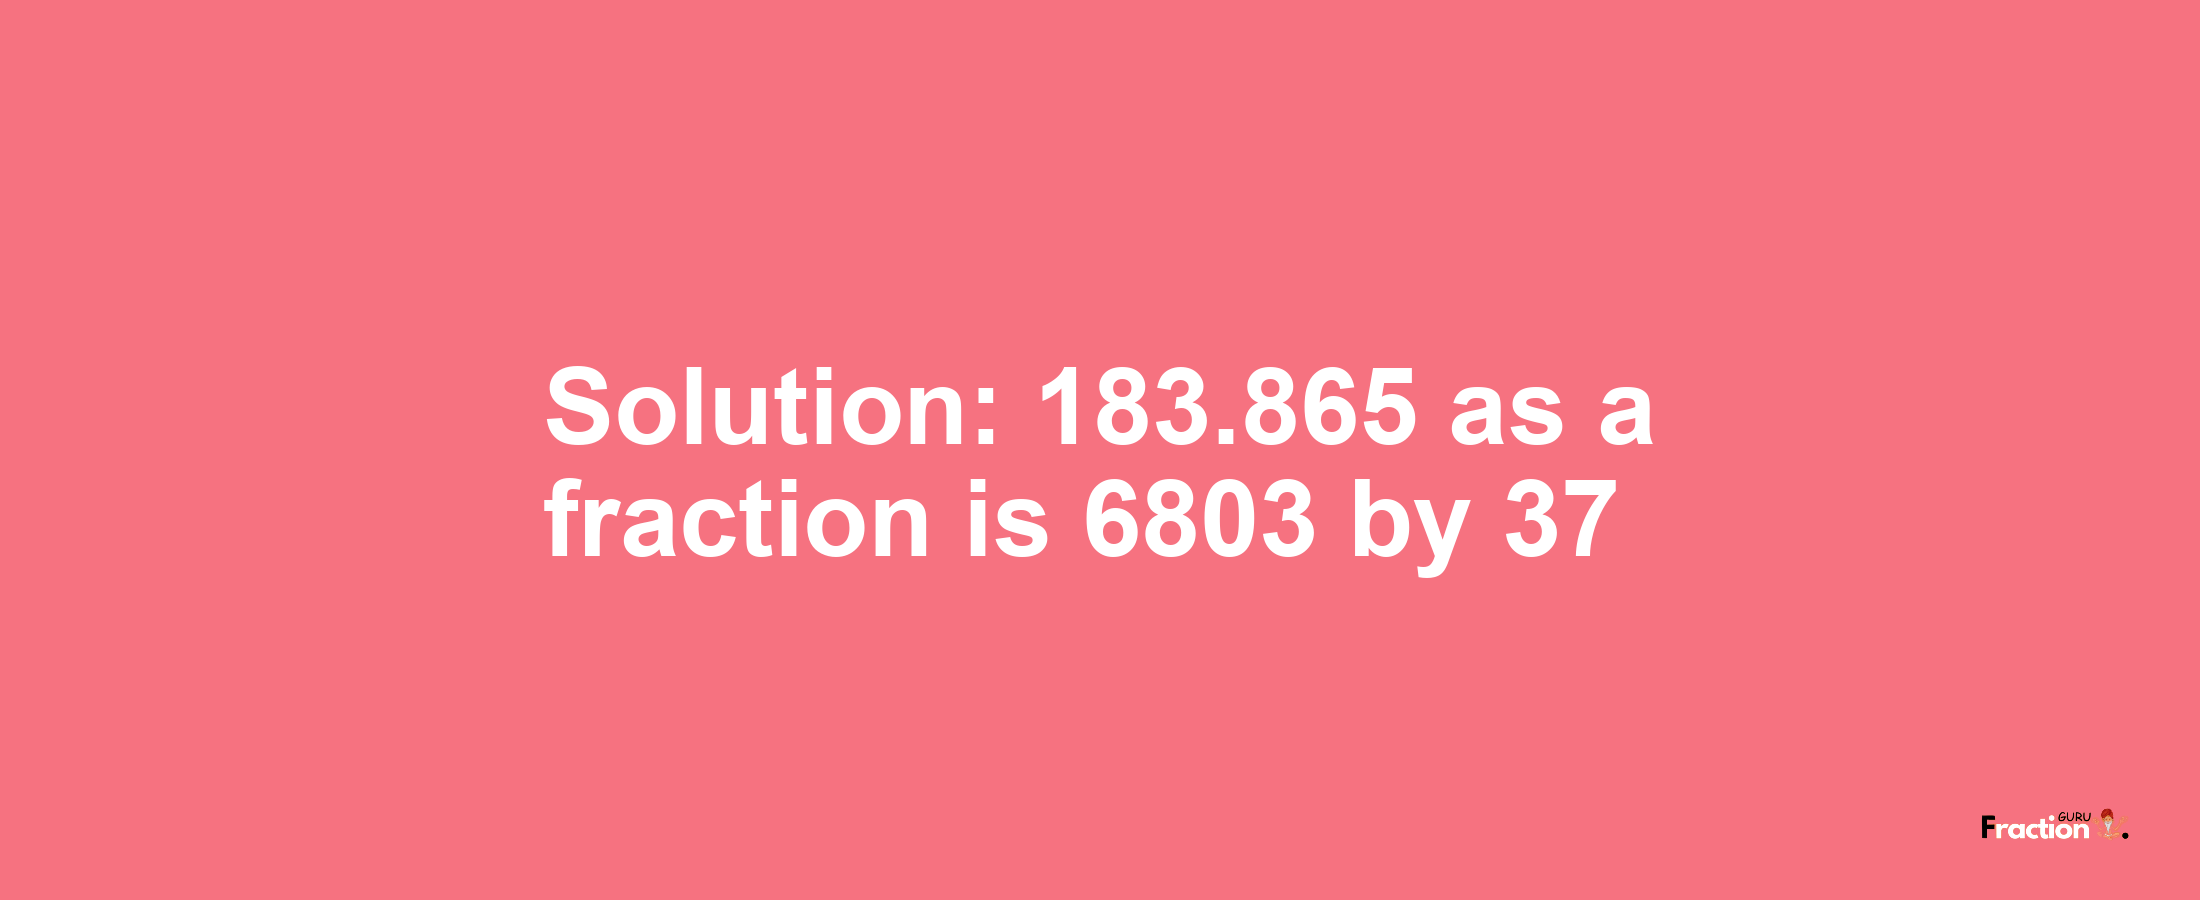 Solution:183.865 as a fraction is 6803/37